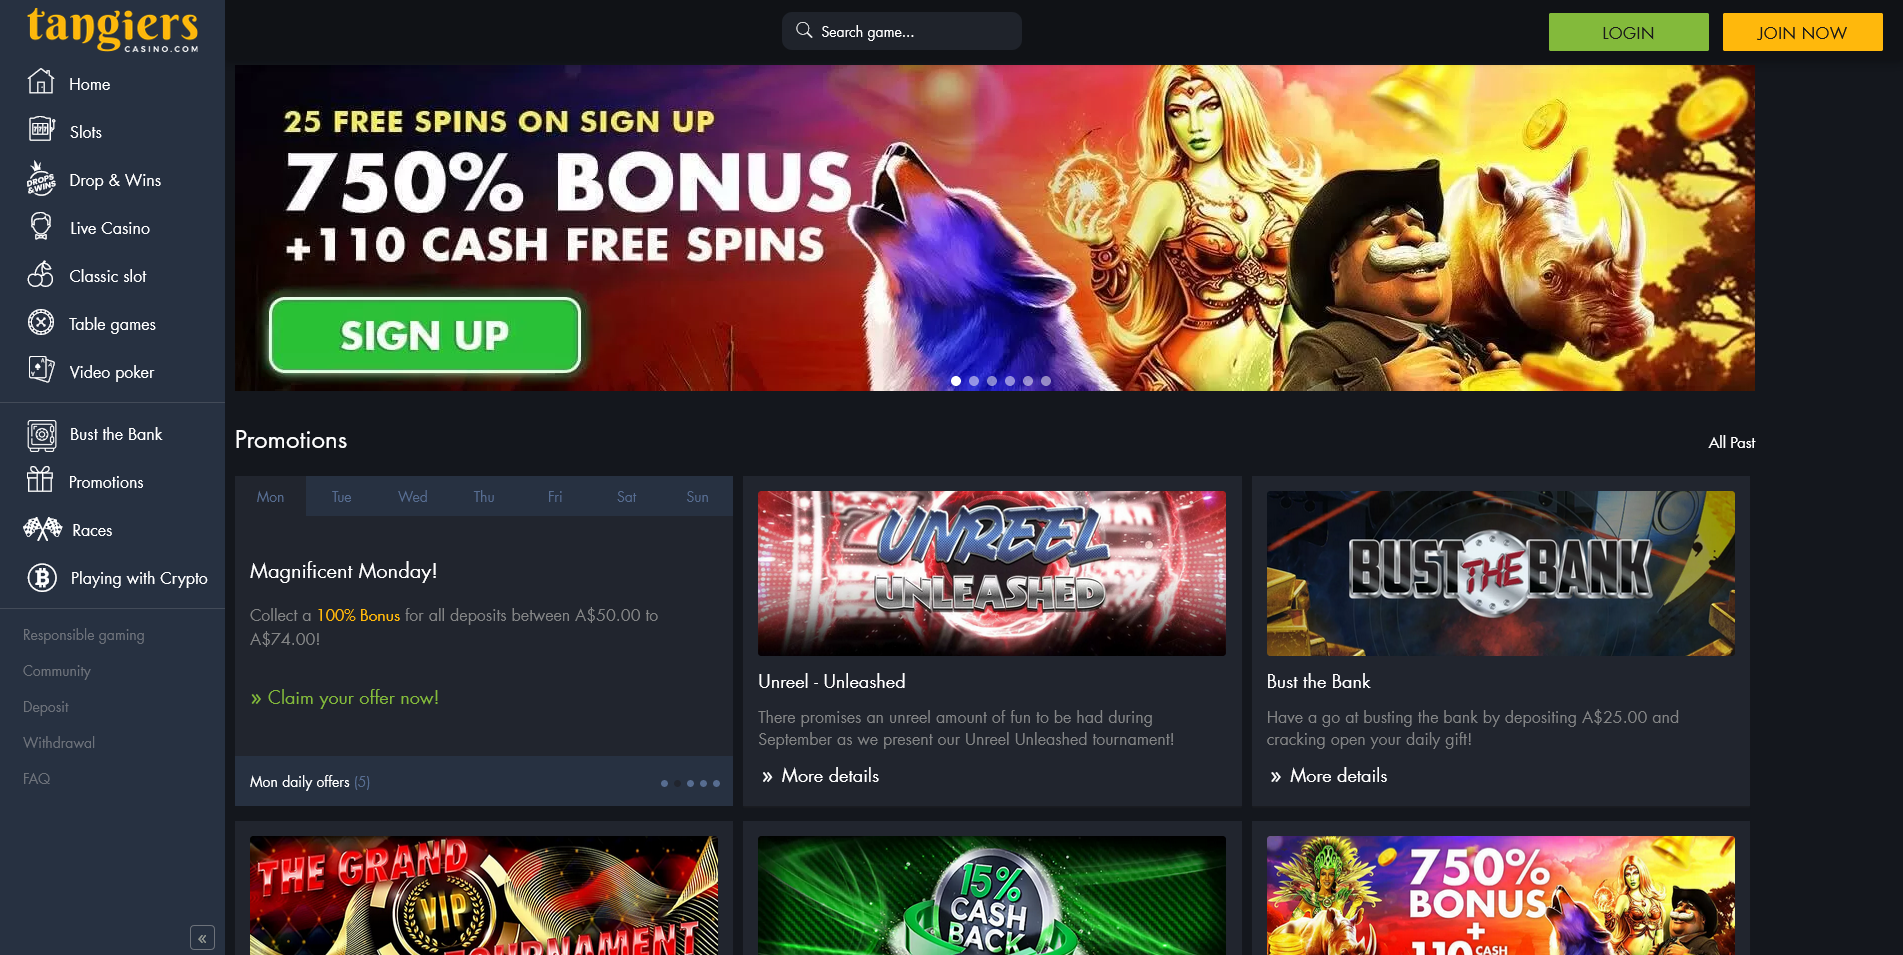 Screenshot of the Tangiers Casino promotions page